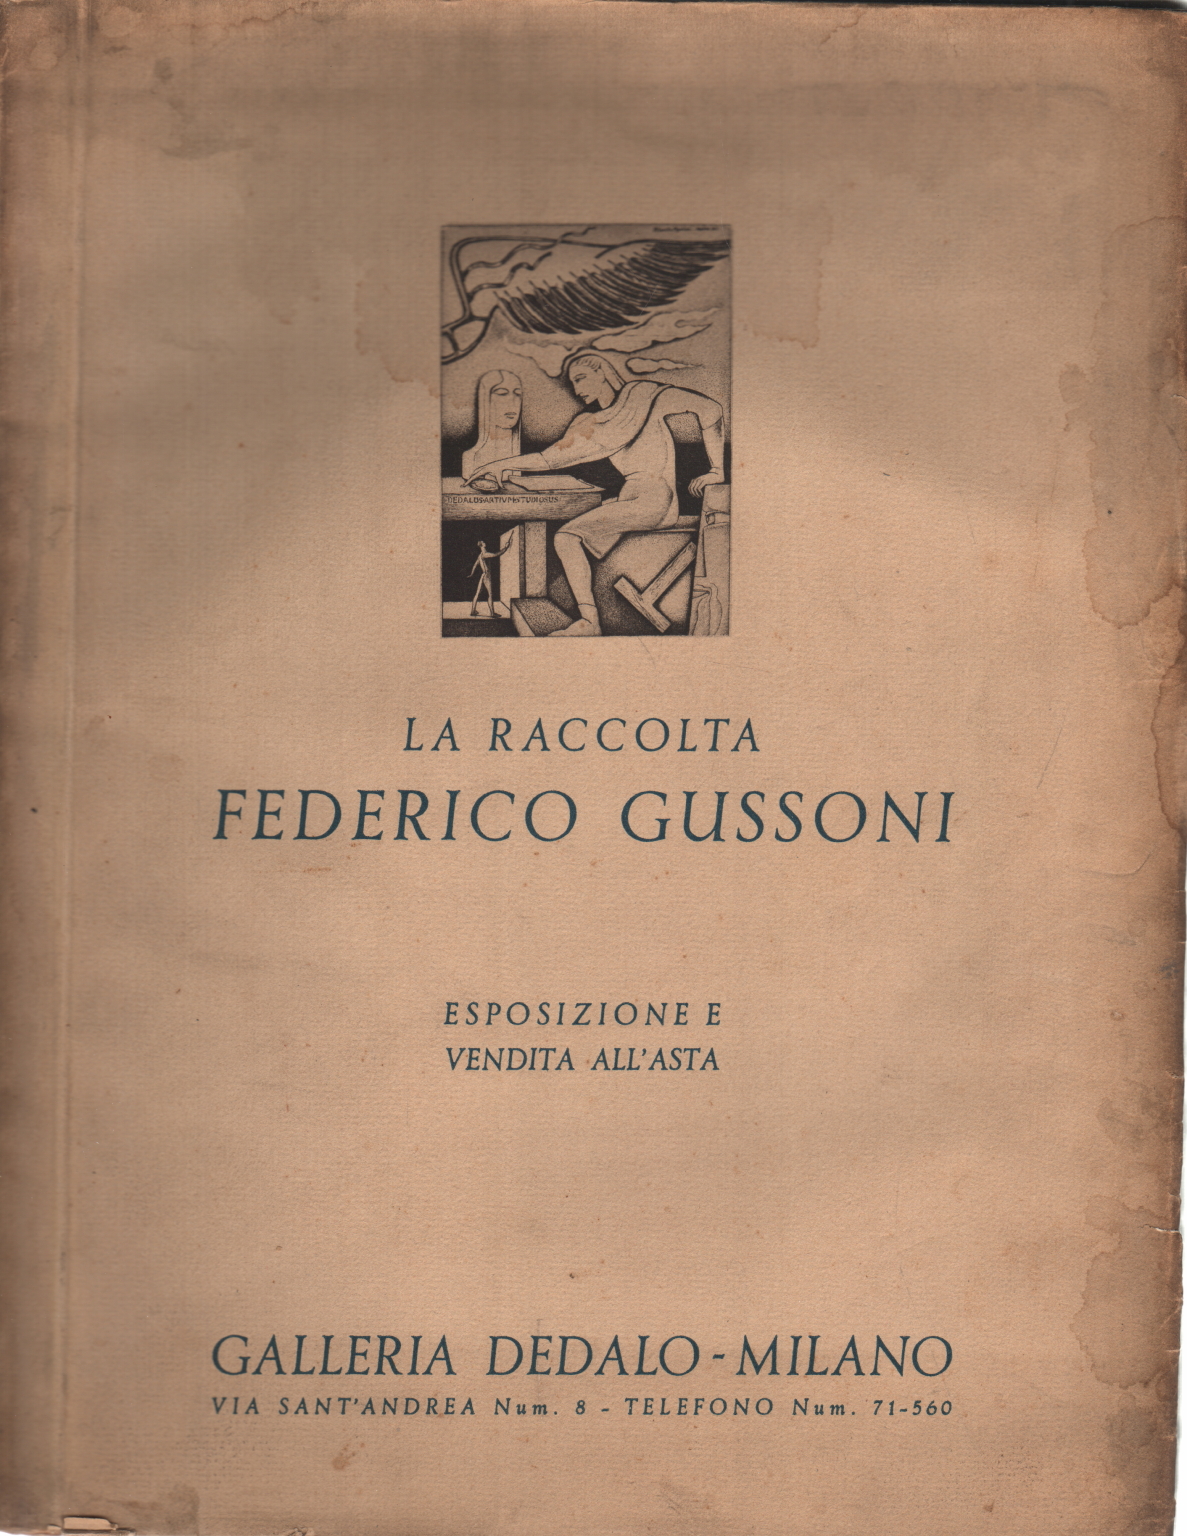 The collection Federico Gussoni, AA.VV.